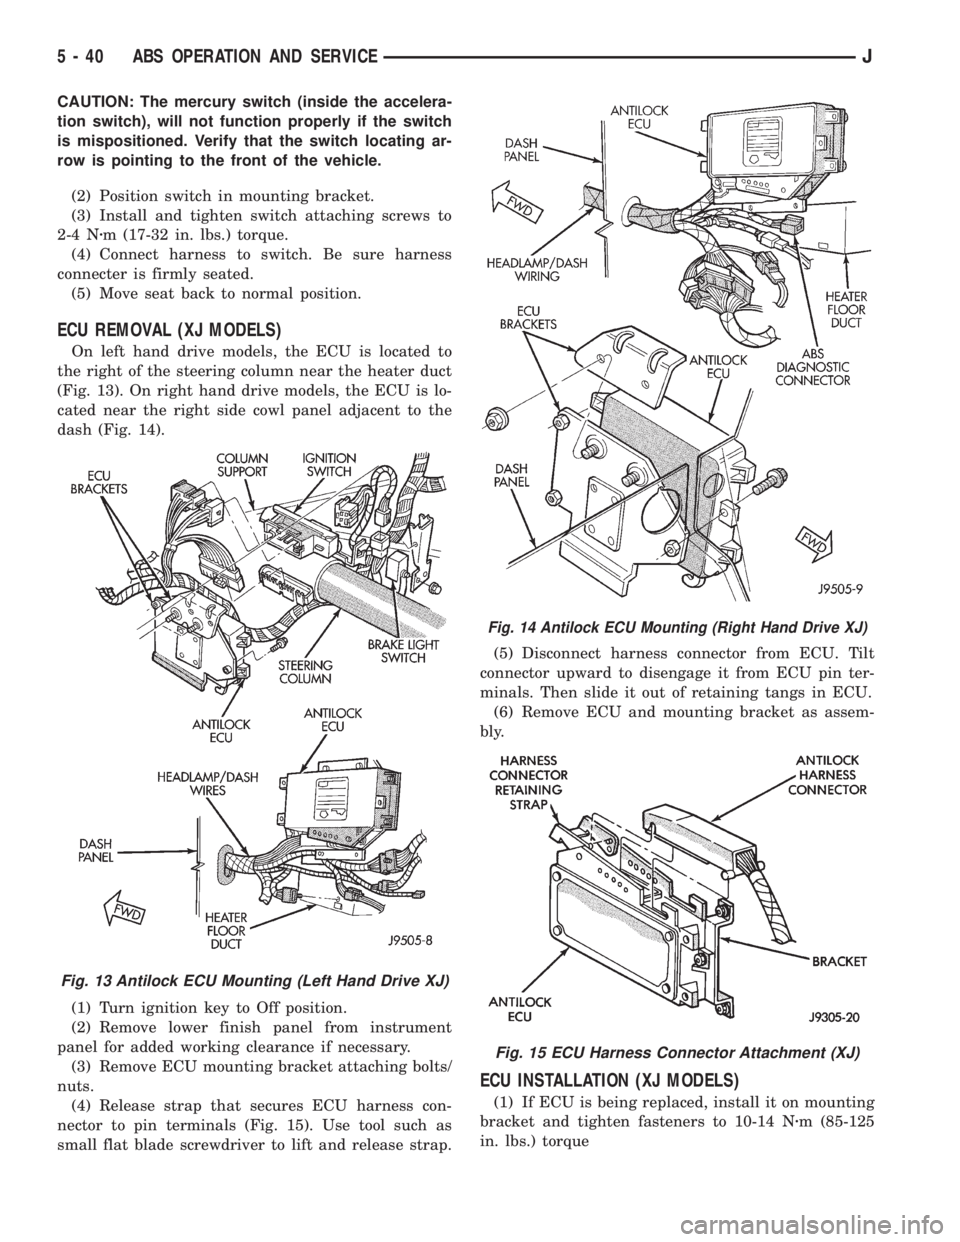 JEEP CHEROKEE 1995  Service Repair Manual CAUTION: The mercury switch (inside the accelera-
tion switch), will not function properly if the switch
is mispositioned. Verify that the switch locating ar-
row is pointing to the front of the vehic